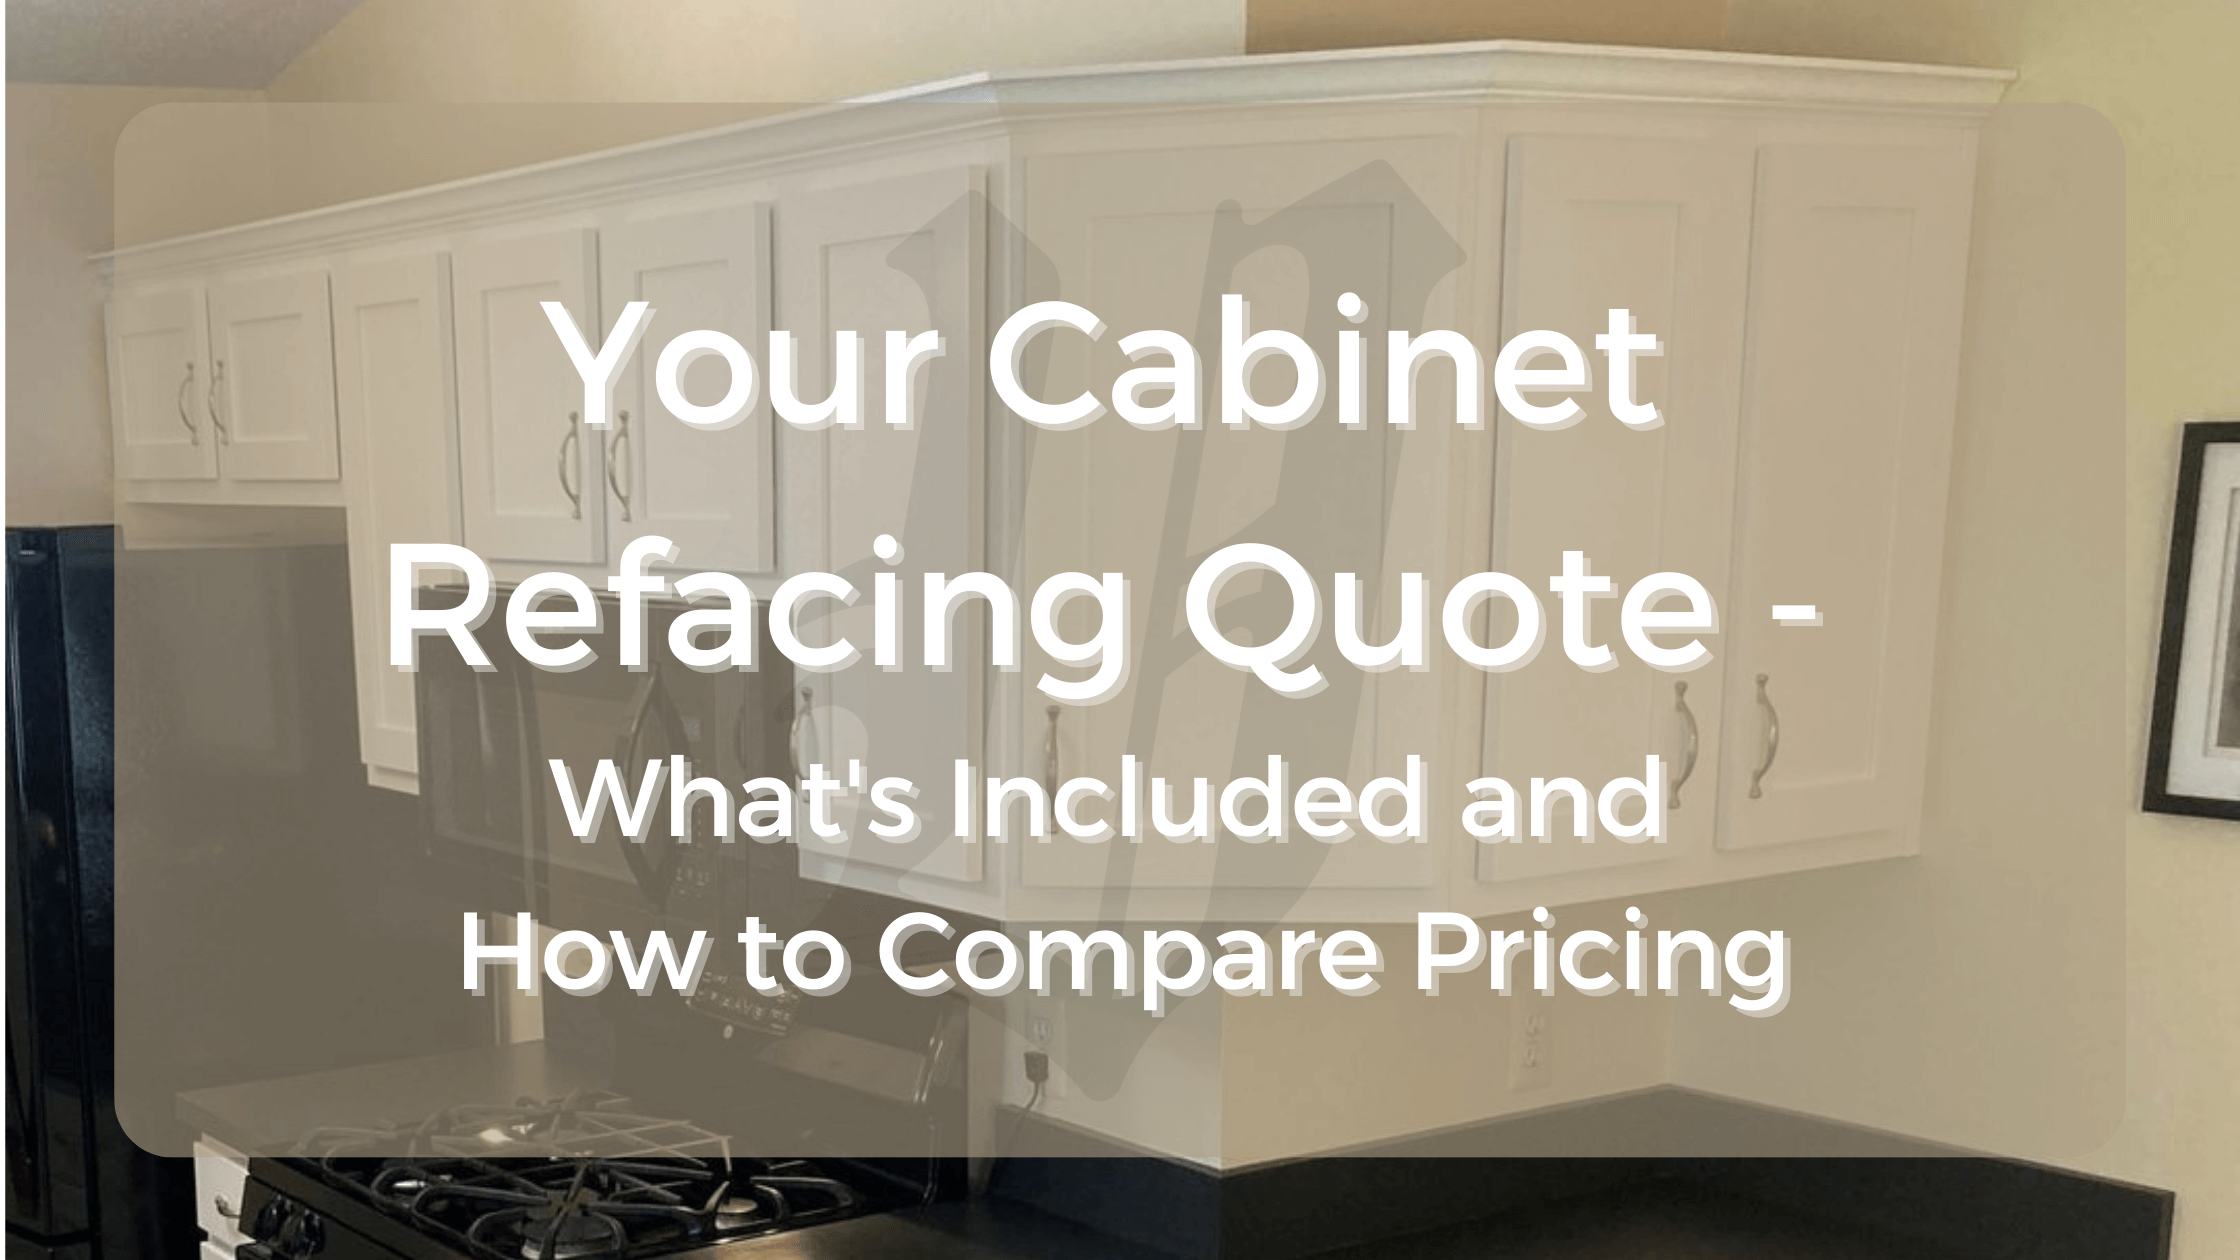 Your cabinet refacing quote